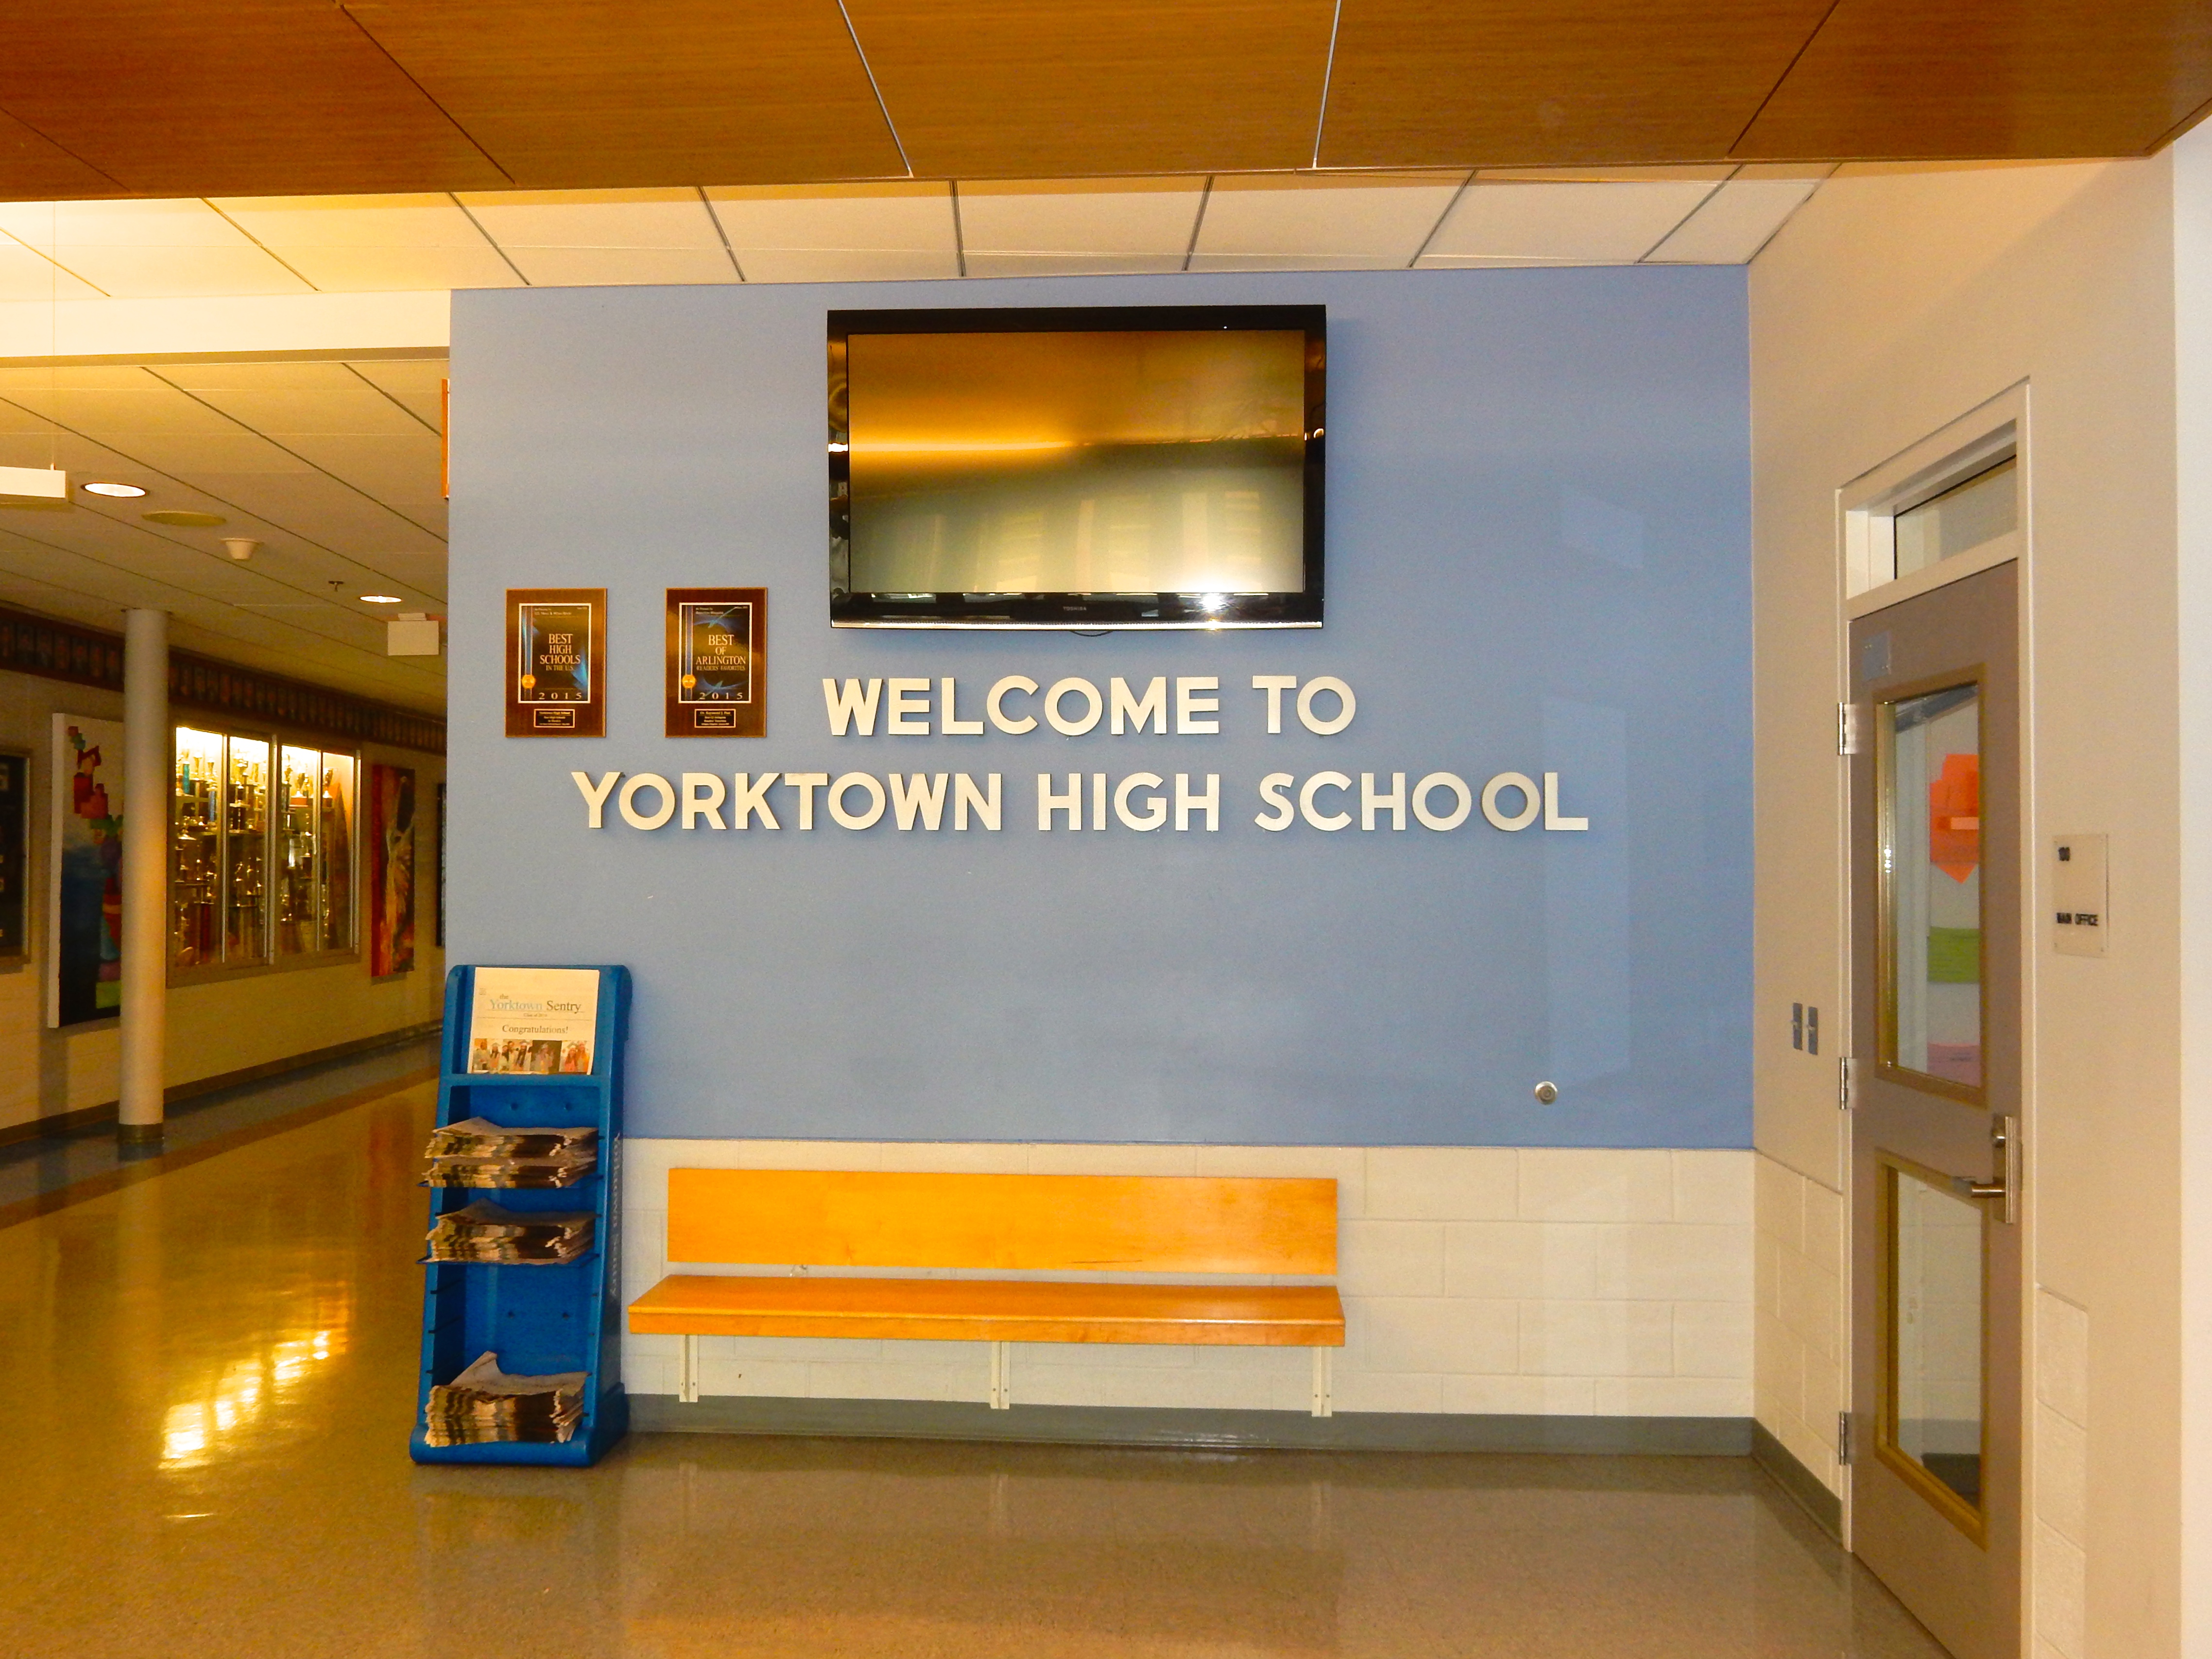 ENTRANCE TO YHS TODAY